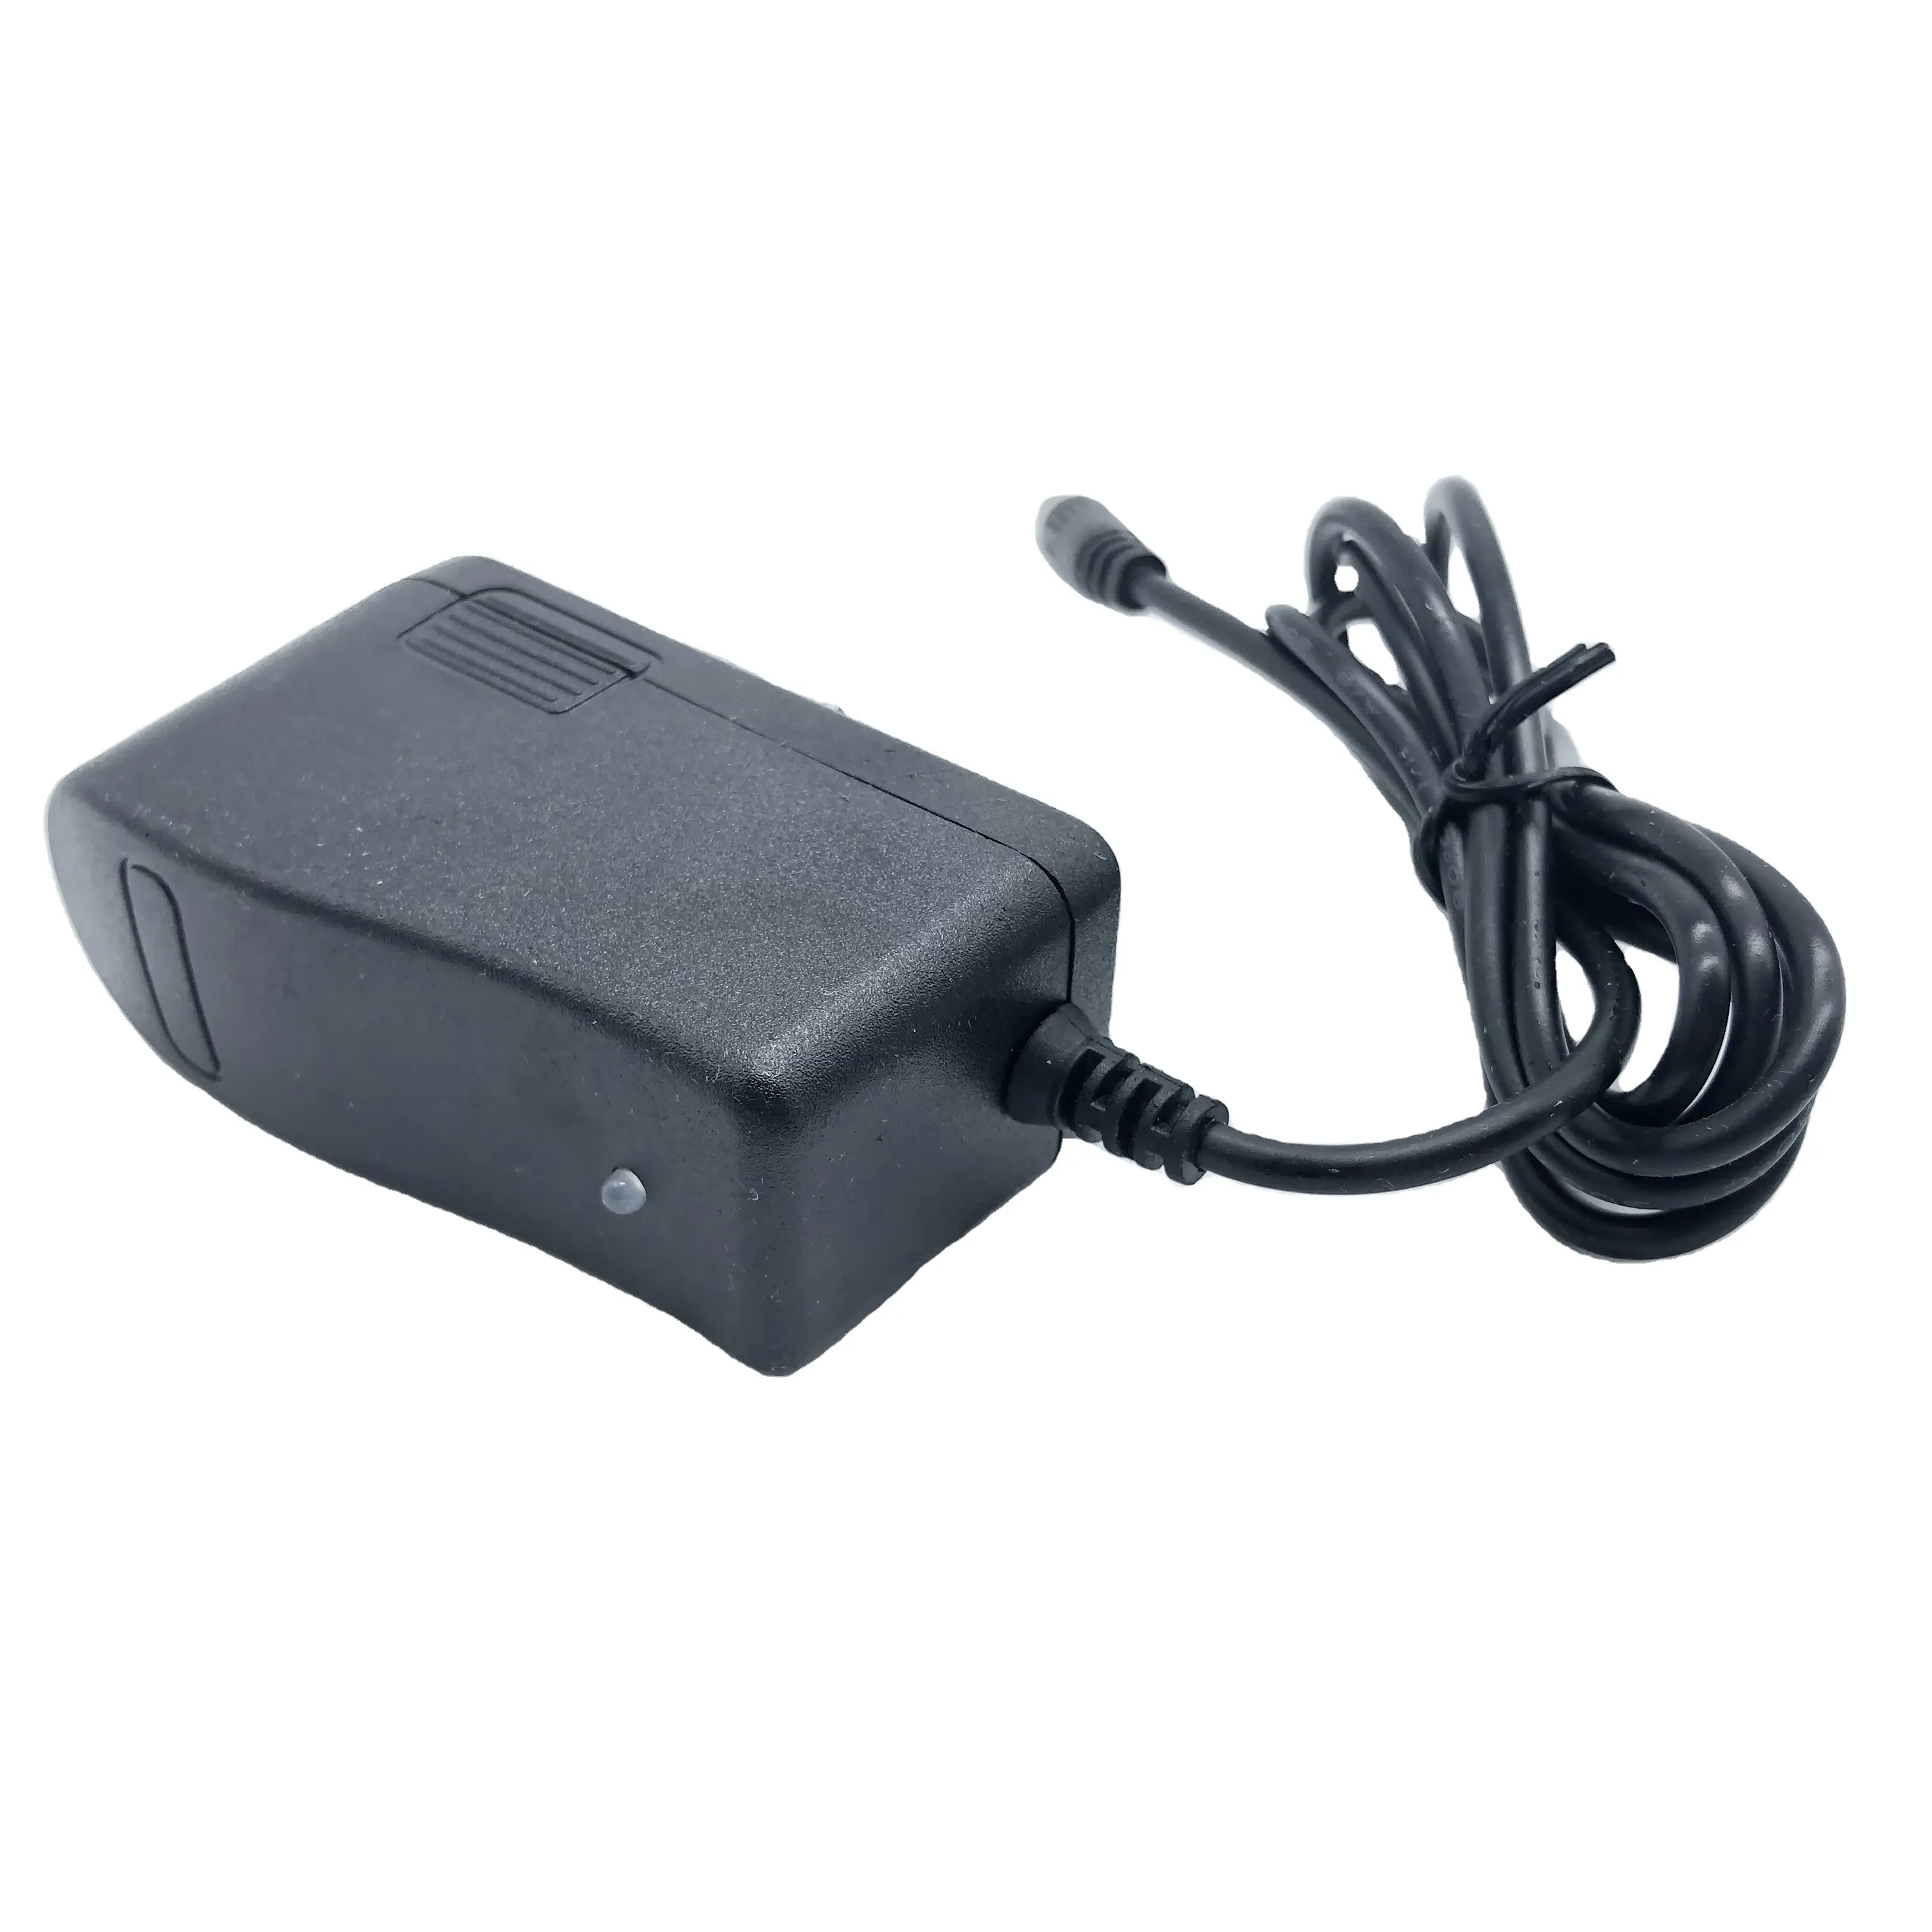 8.4V1A lithium battery charger 18650 battery charger polymer battery pack power tool charger